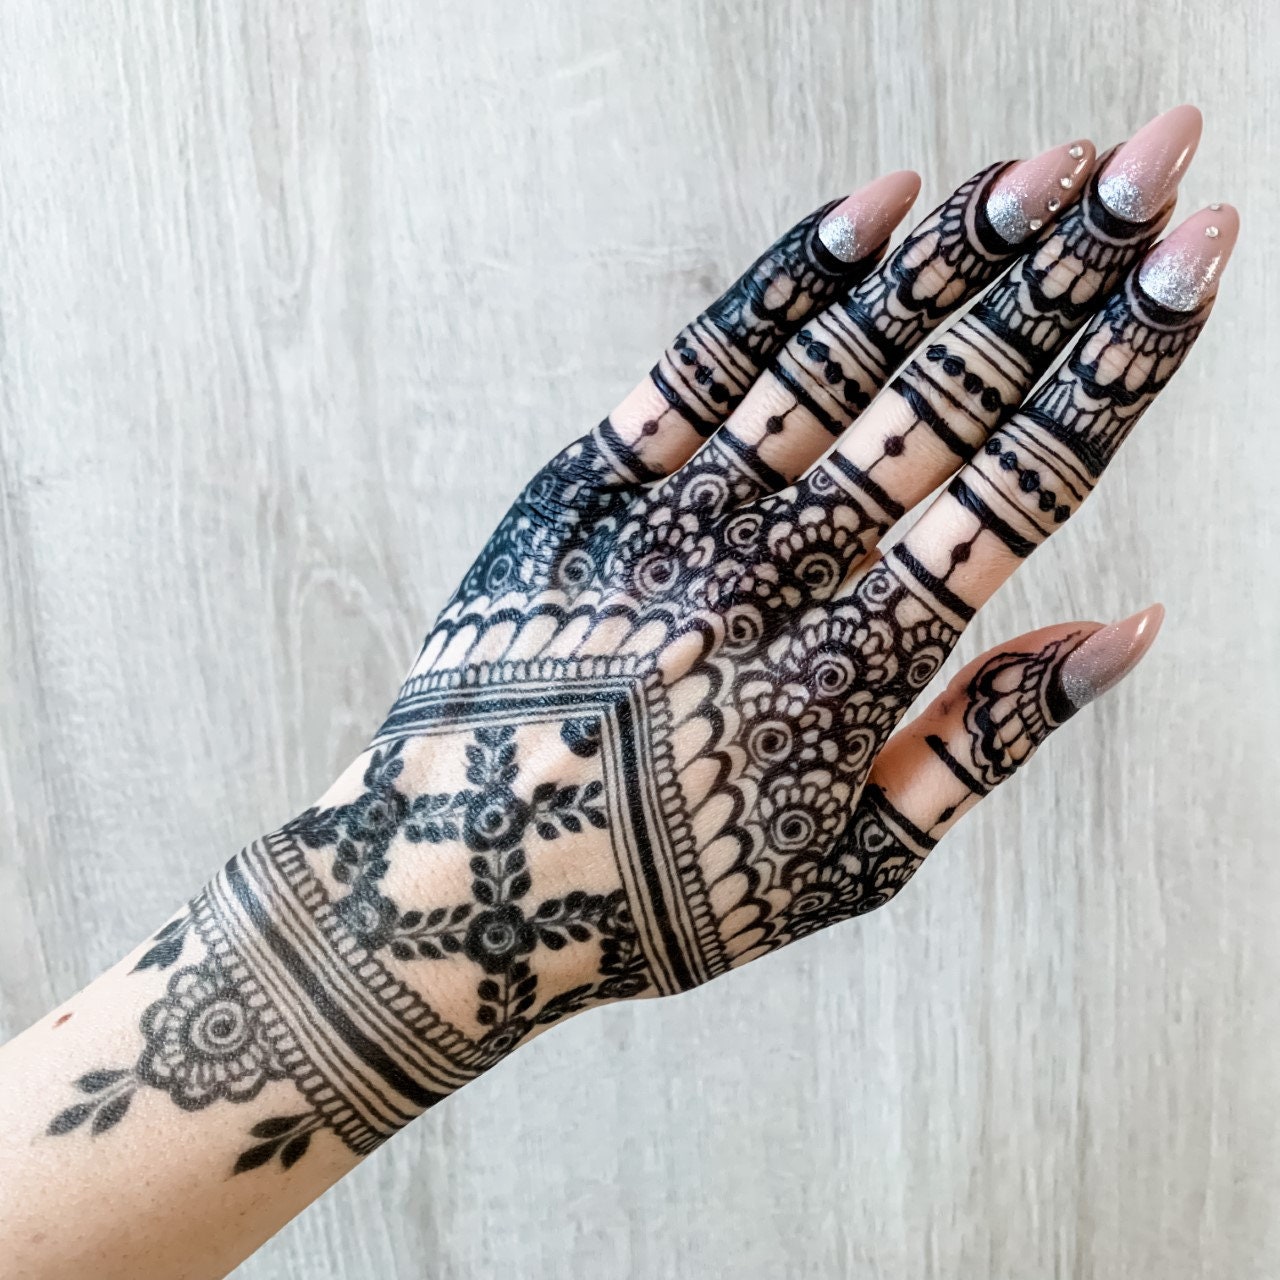 Acrylic practice hand for henna and jagua tattoos. You can…